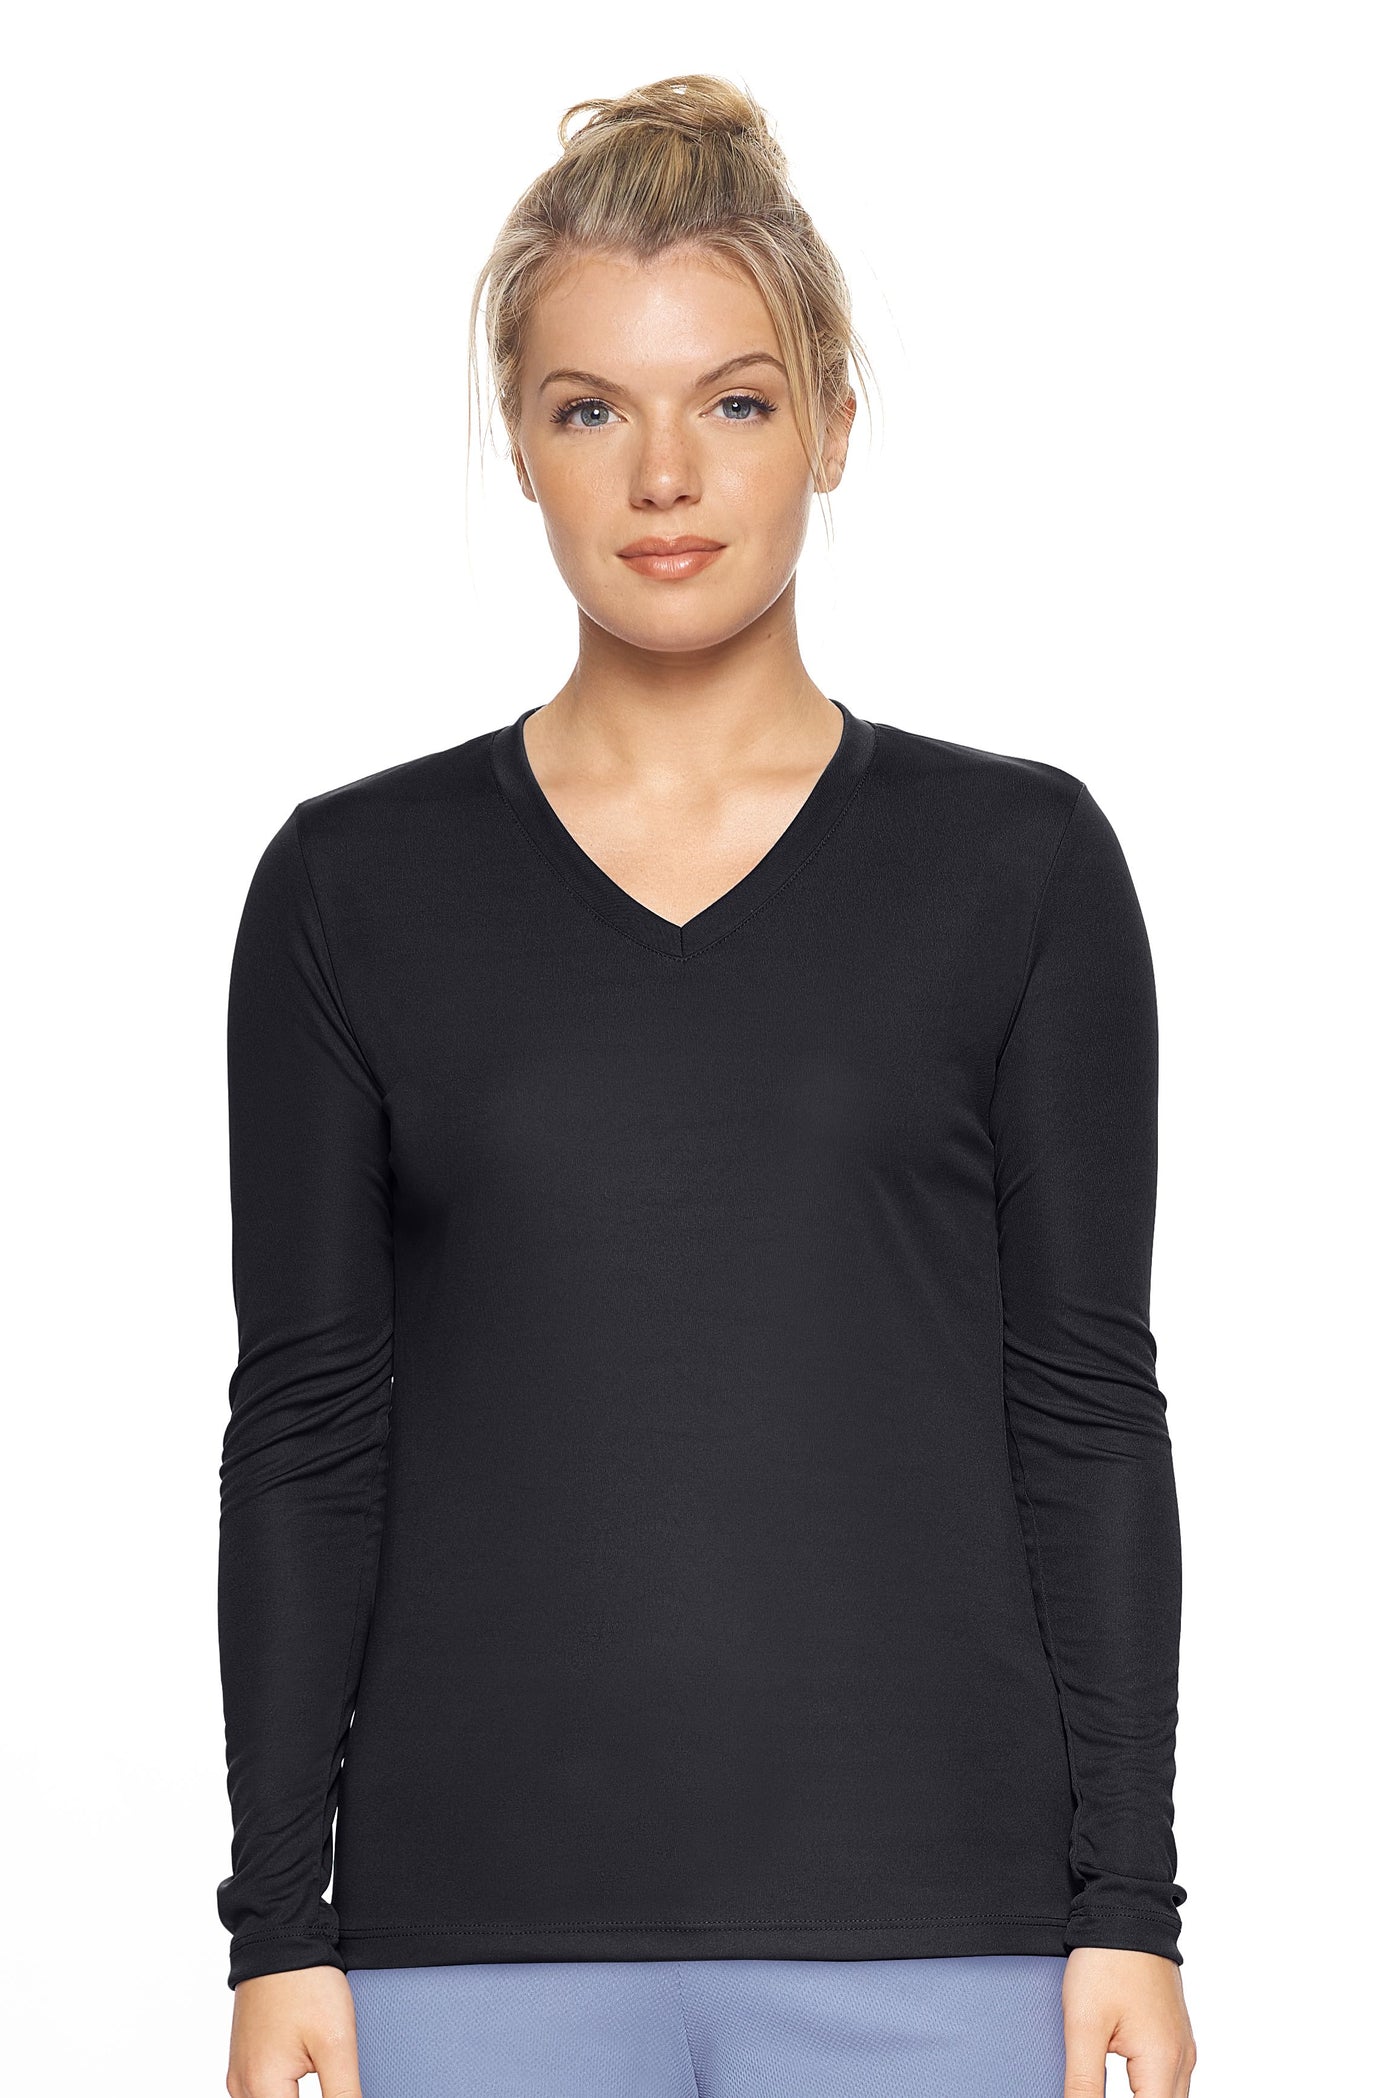 Expert Brand Retail Womens Activewear Womens Sportswear Made in USA Long Sleeve Tec Tee Runners Tee V Neck black#color_black